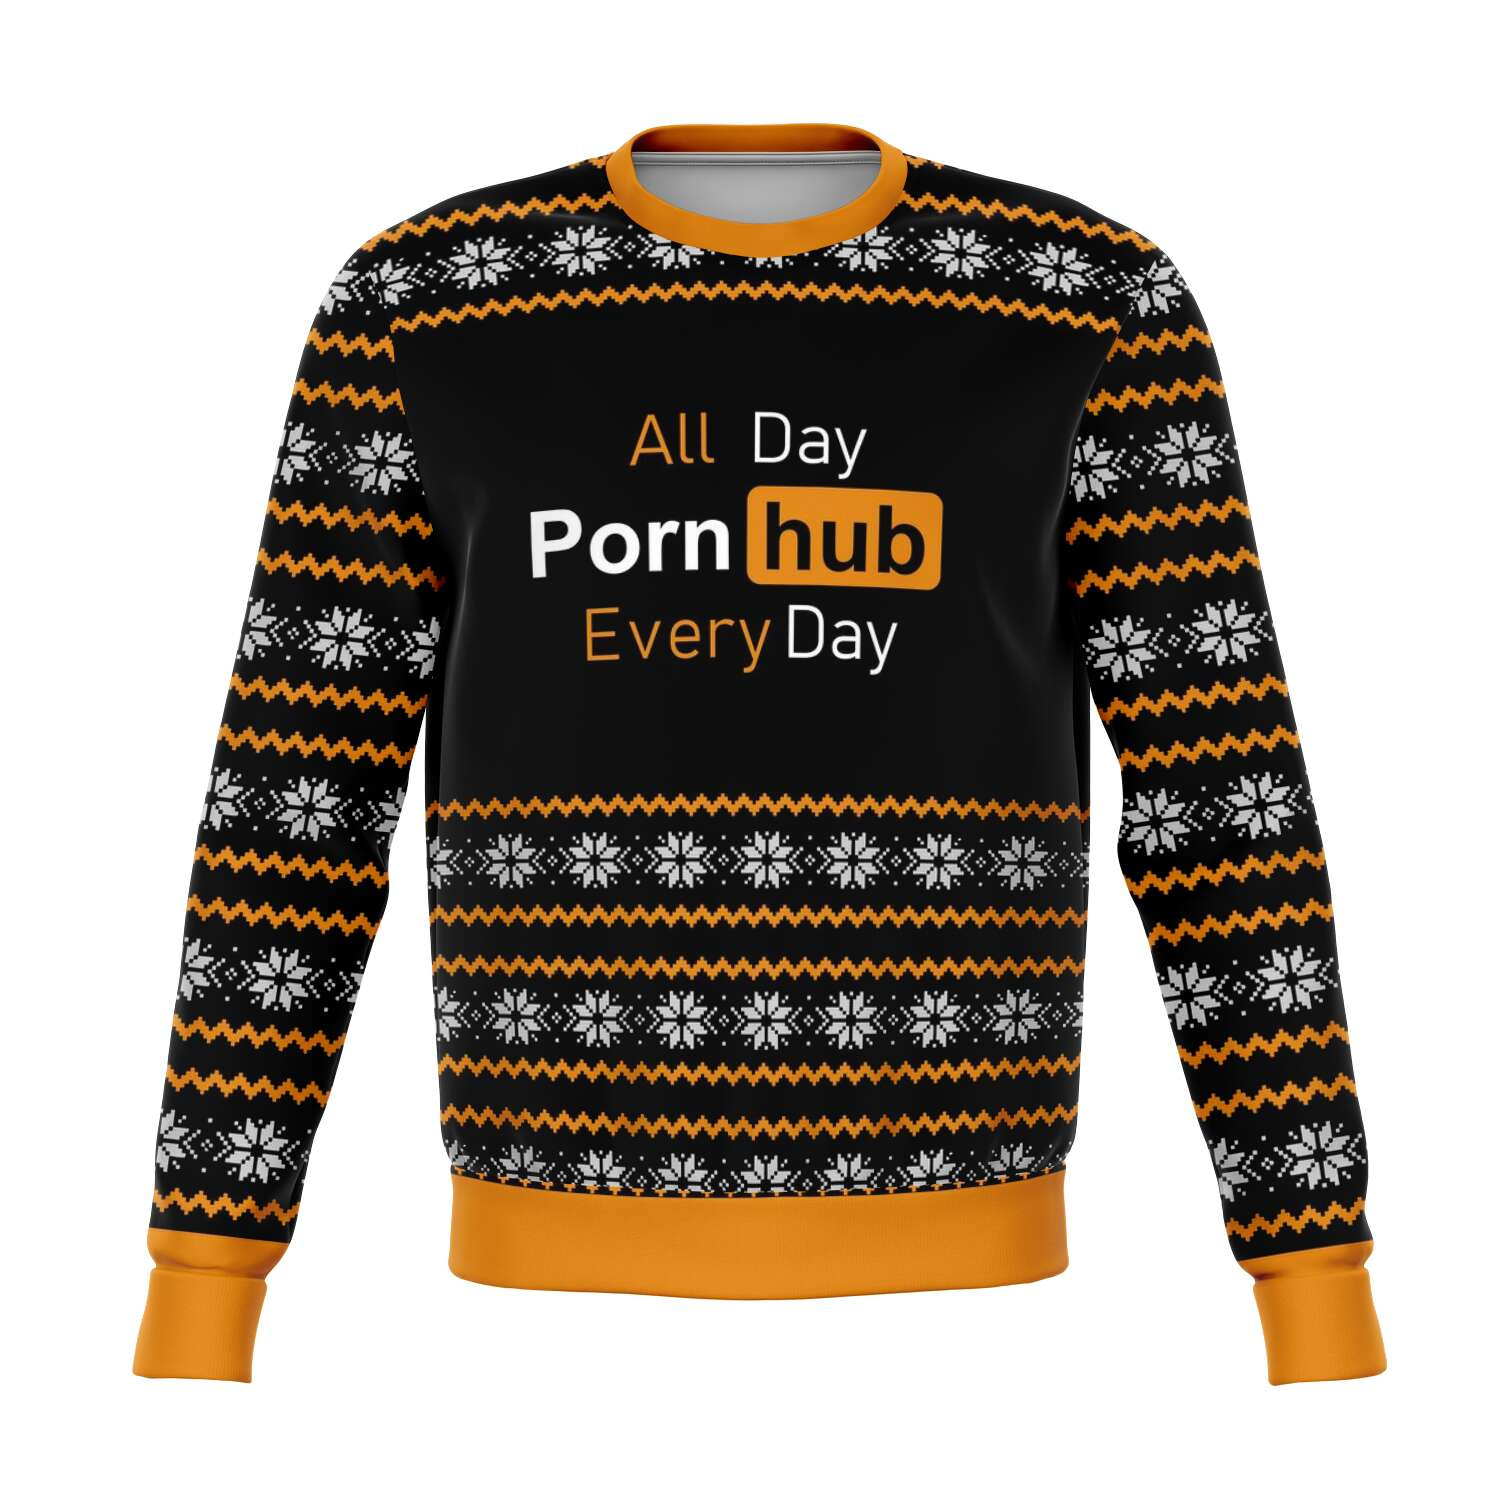 Pornhub Every Day Ugly Sweater